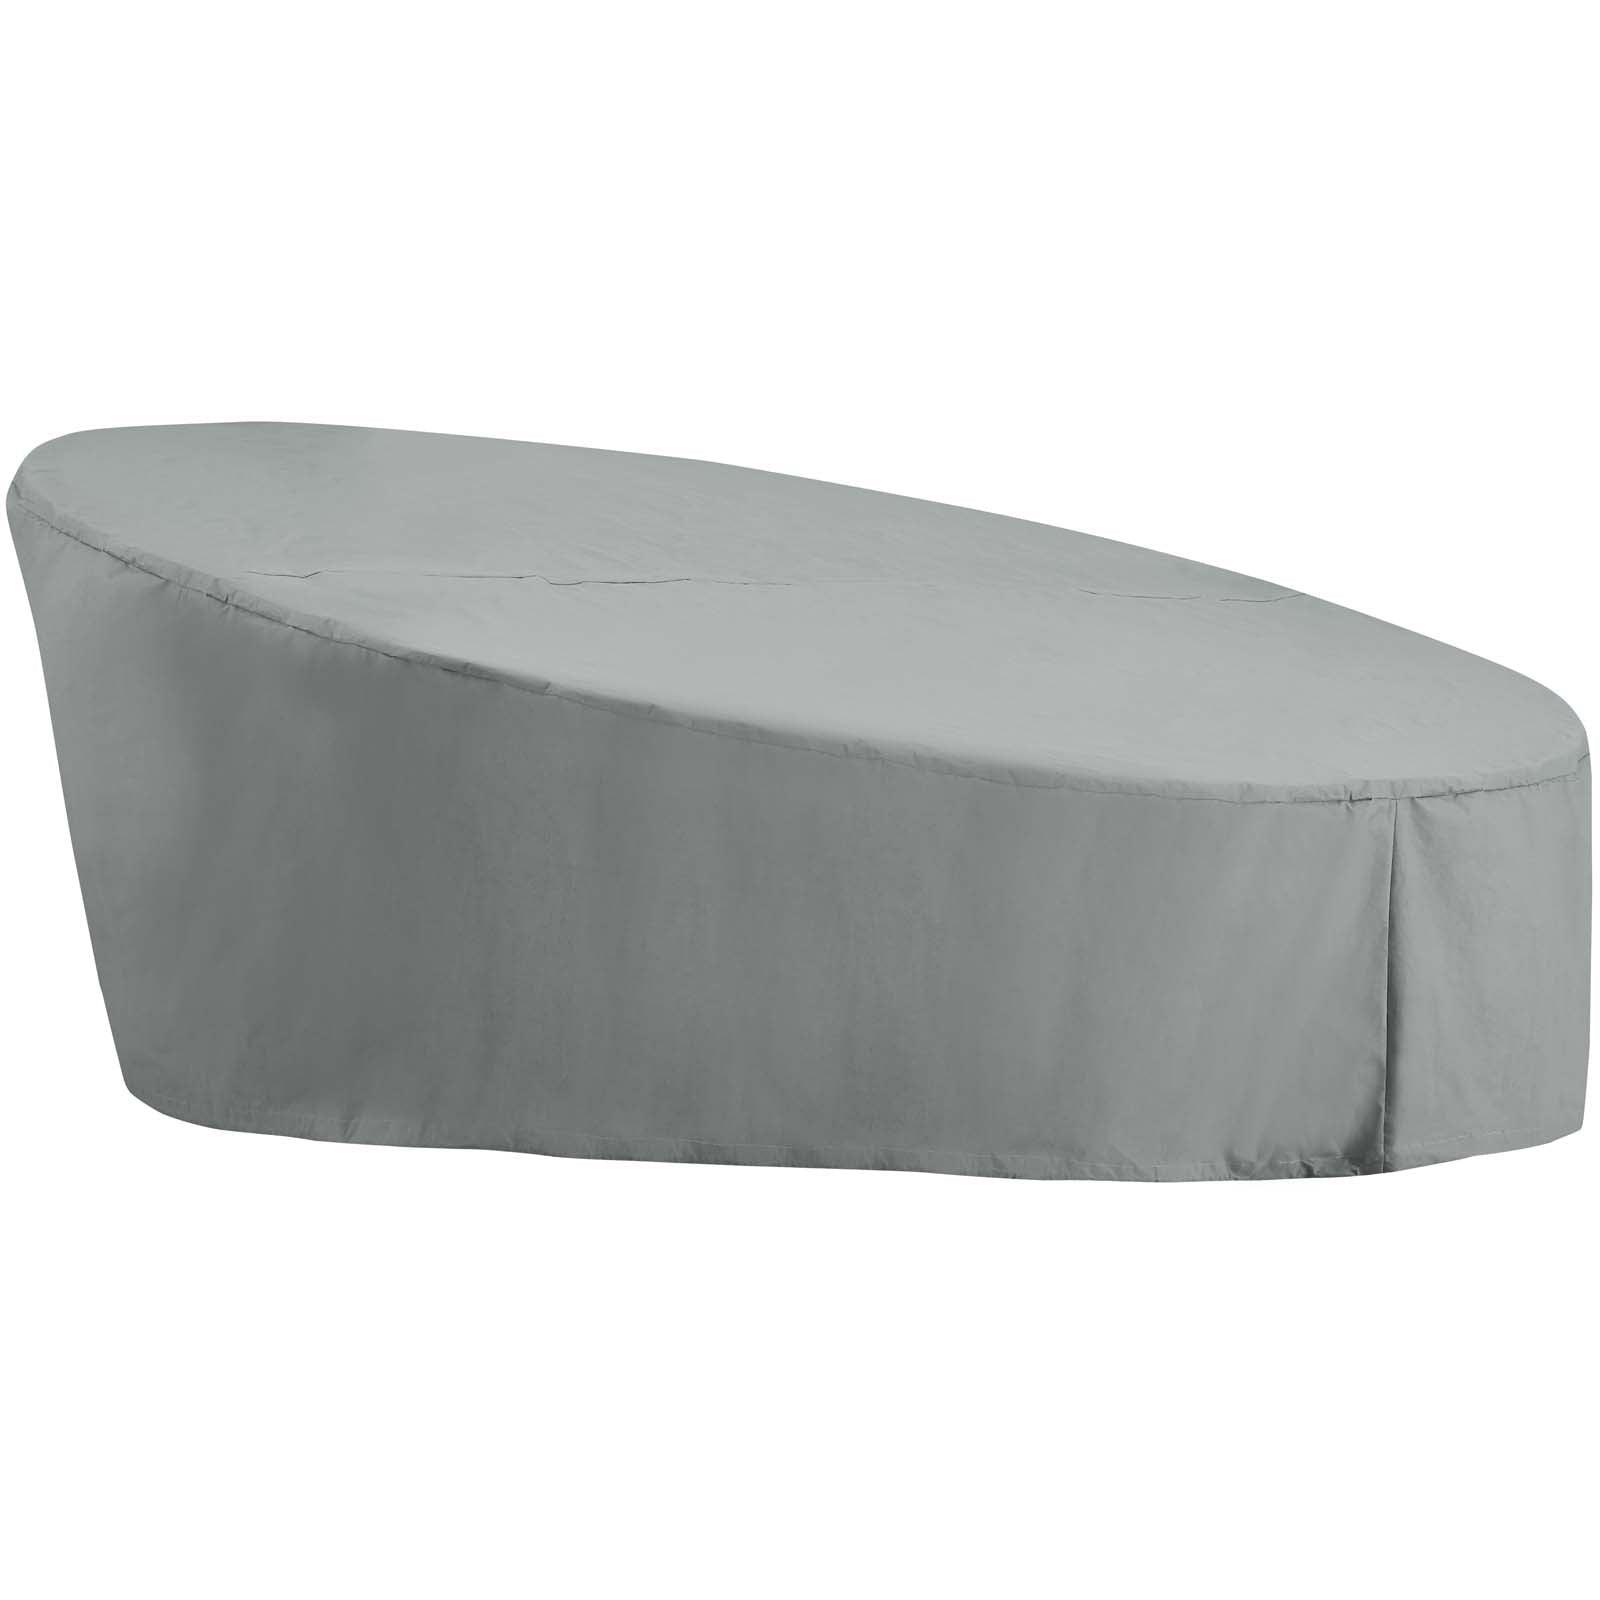 Modway Immerse Convene / Sojourn / Summon Daybed Outdoor Patio Furniture Cover FredCo